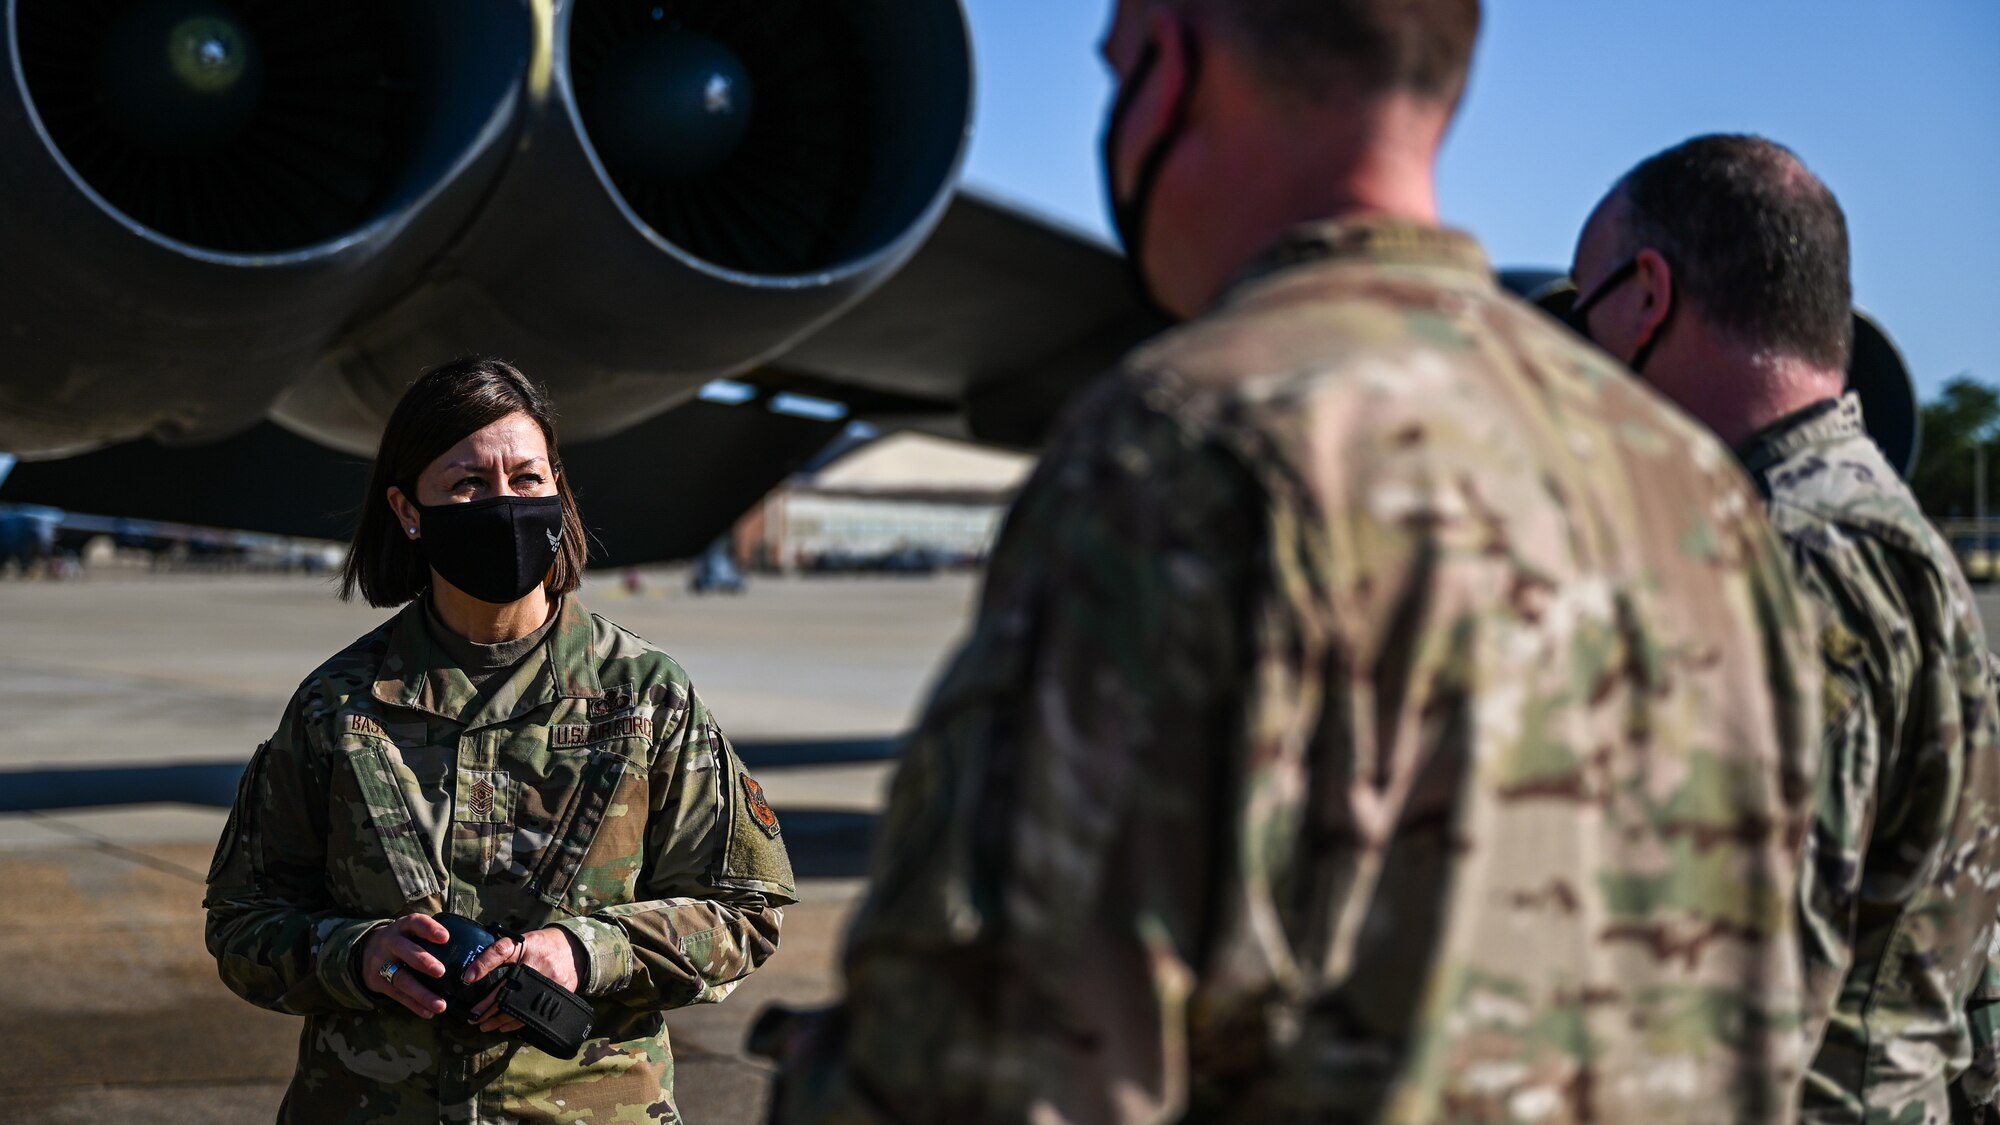 Chief Master Sgt. of the Air Force JoAnne S. Bass, speaks with members of the 2nd Aircraft Maintenance Squadron during a tour of Barksdale Air Force Base, Louisiana, April 21, 2021. During the tour, Bass familiarized herself with the mission of the 2nd Bomb Wing. (U.S. Air Force photo by Senior Airman Christina Graves)